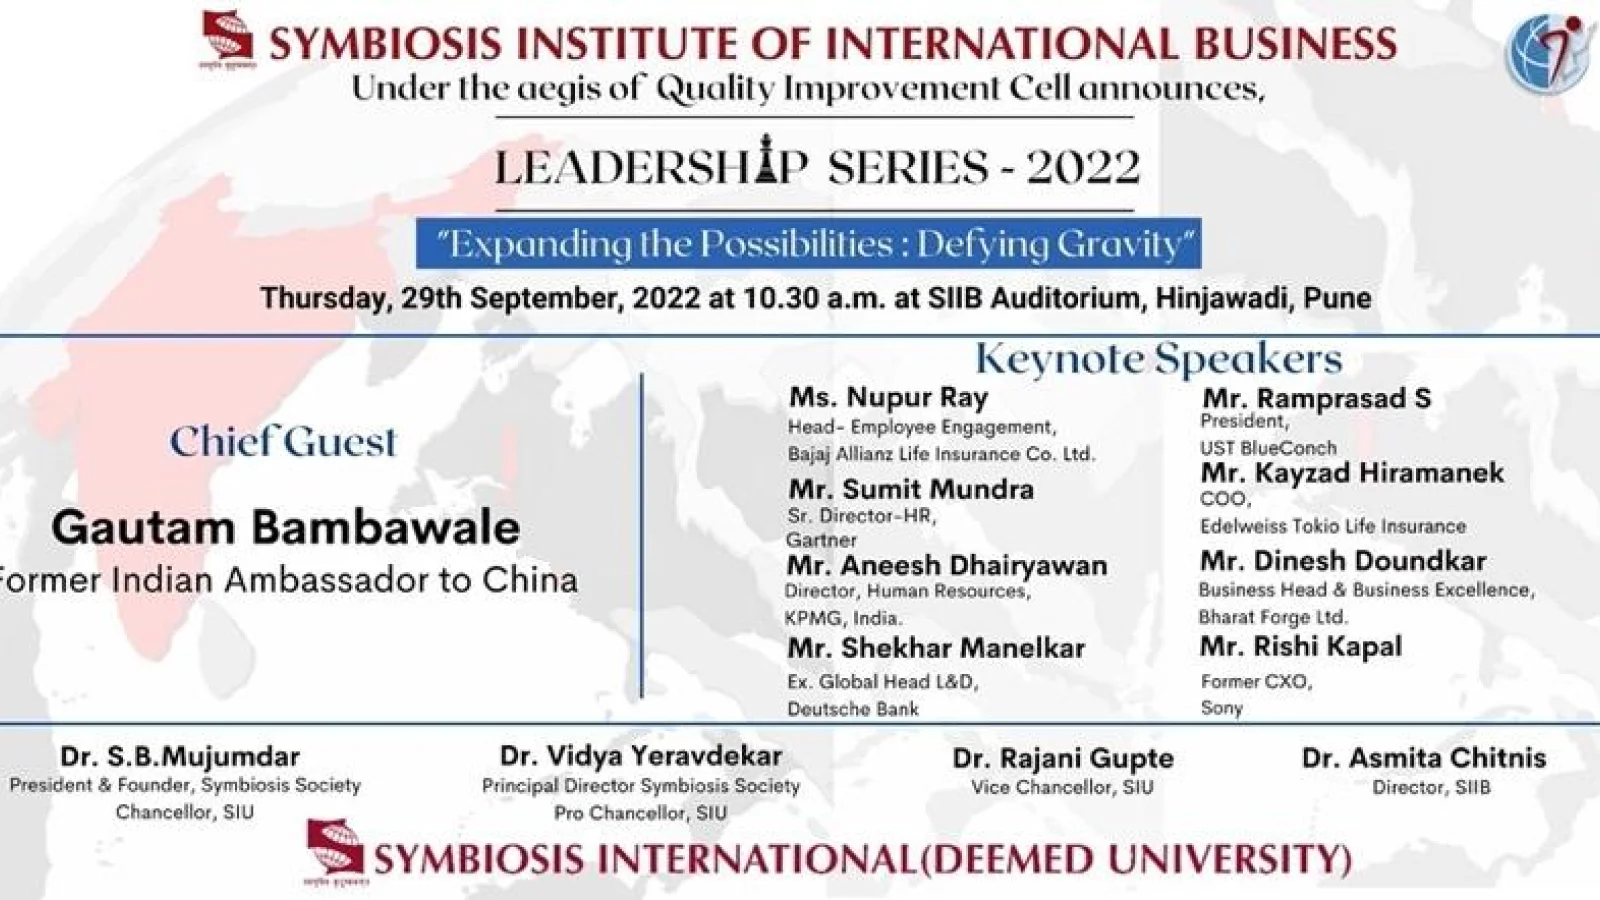 Leadership Series 2022, flagship event of SIIB, with the theme